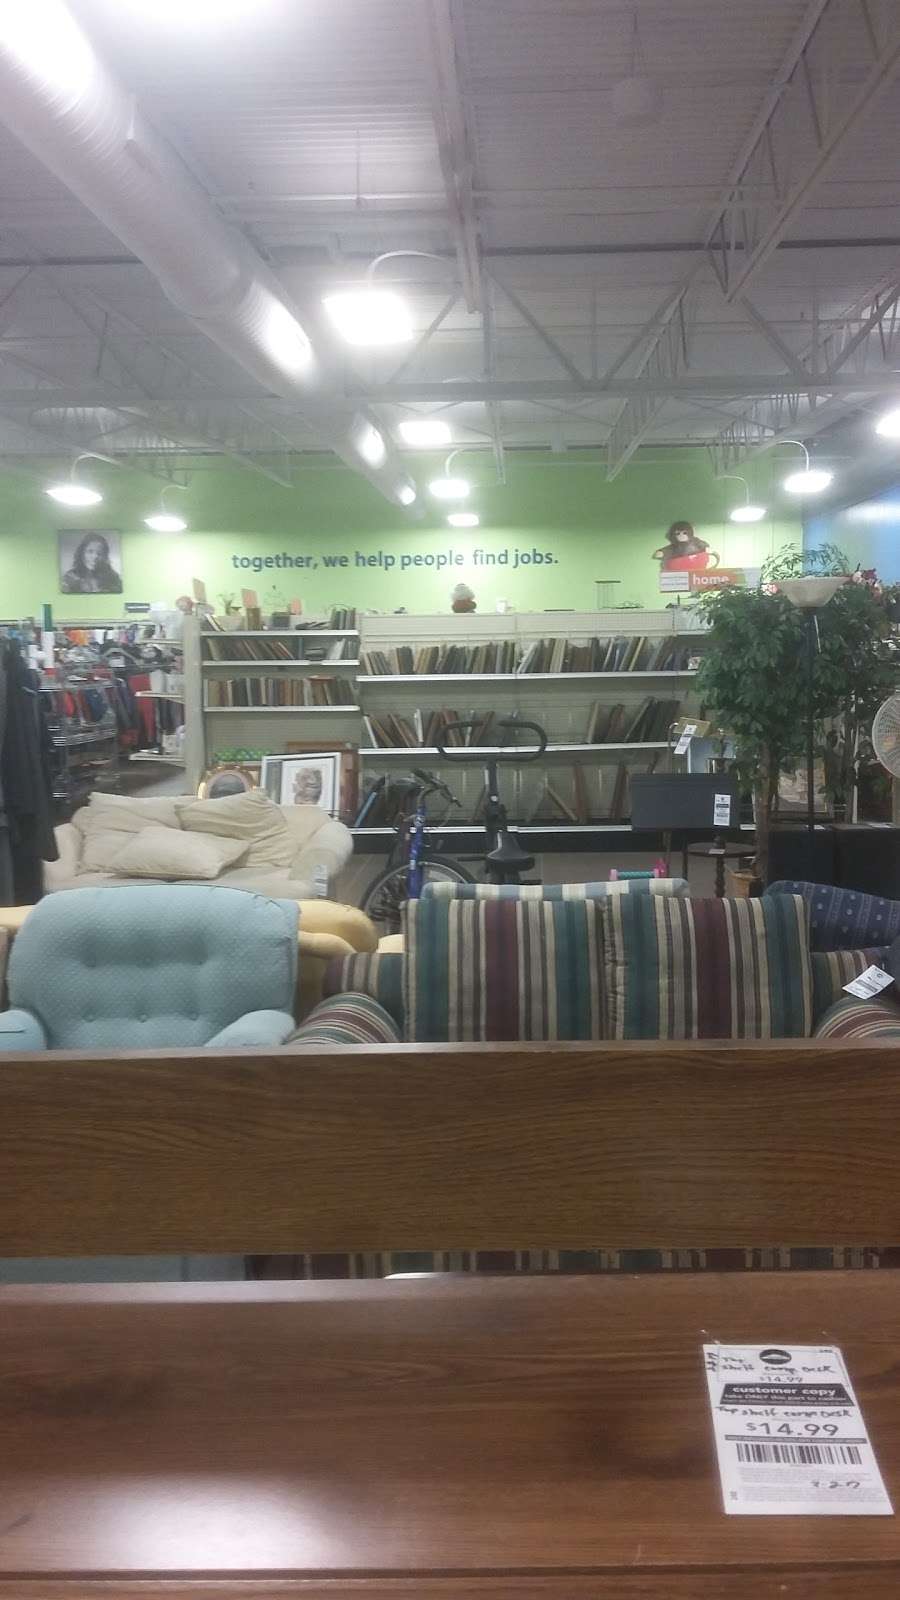 Goodwill Store | 8450 N Michigan Rd, Indianapolis, IN 46268, USA | Phone: (317) 334-0635